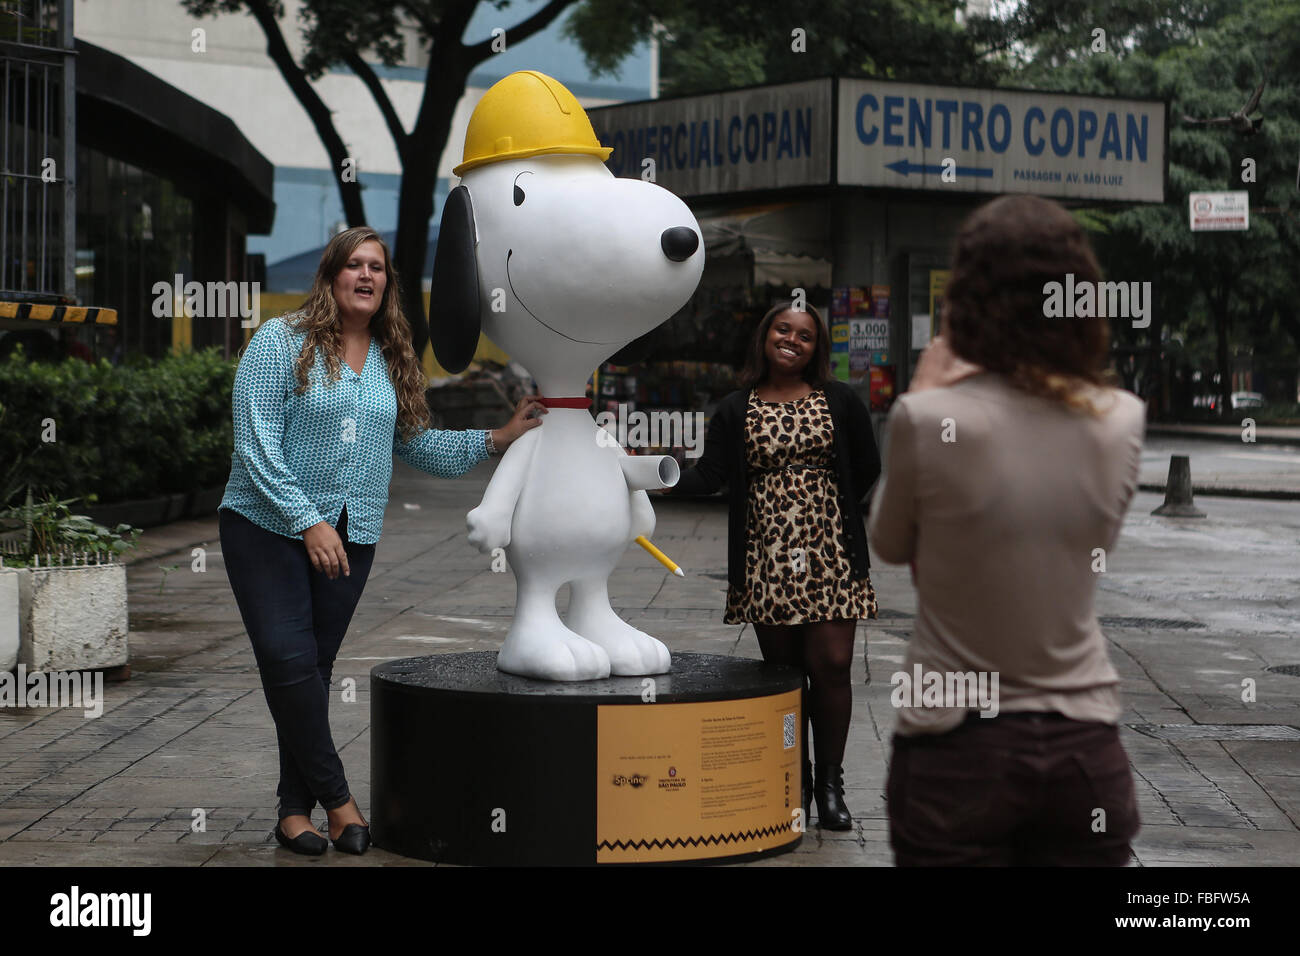 Sao Paulo, Brazil. 15th Jan, 2016. Women pose with a figure of Snoopy on a street in Sao Paulo, Brazil, on Jan. 15, 2016. According to local press, figures of Snoopy are displayed in tourist places as part of the promotion of the film "Charlie Brown and Snoopy: Peanuts movie". © Rahel Patrasso/Xinhua/Alamy Live News Stock Photo